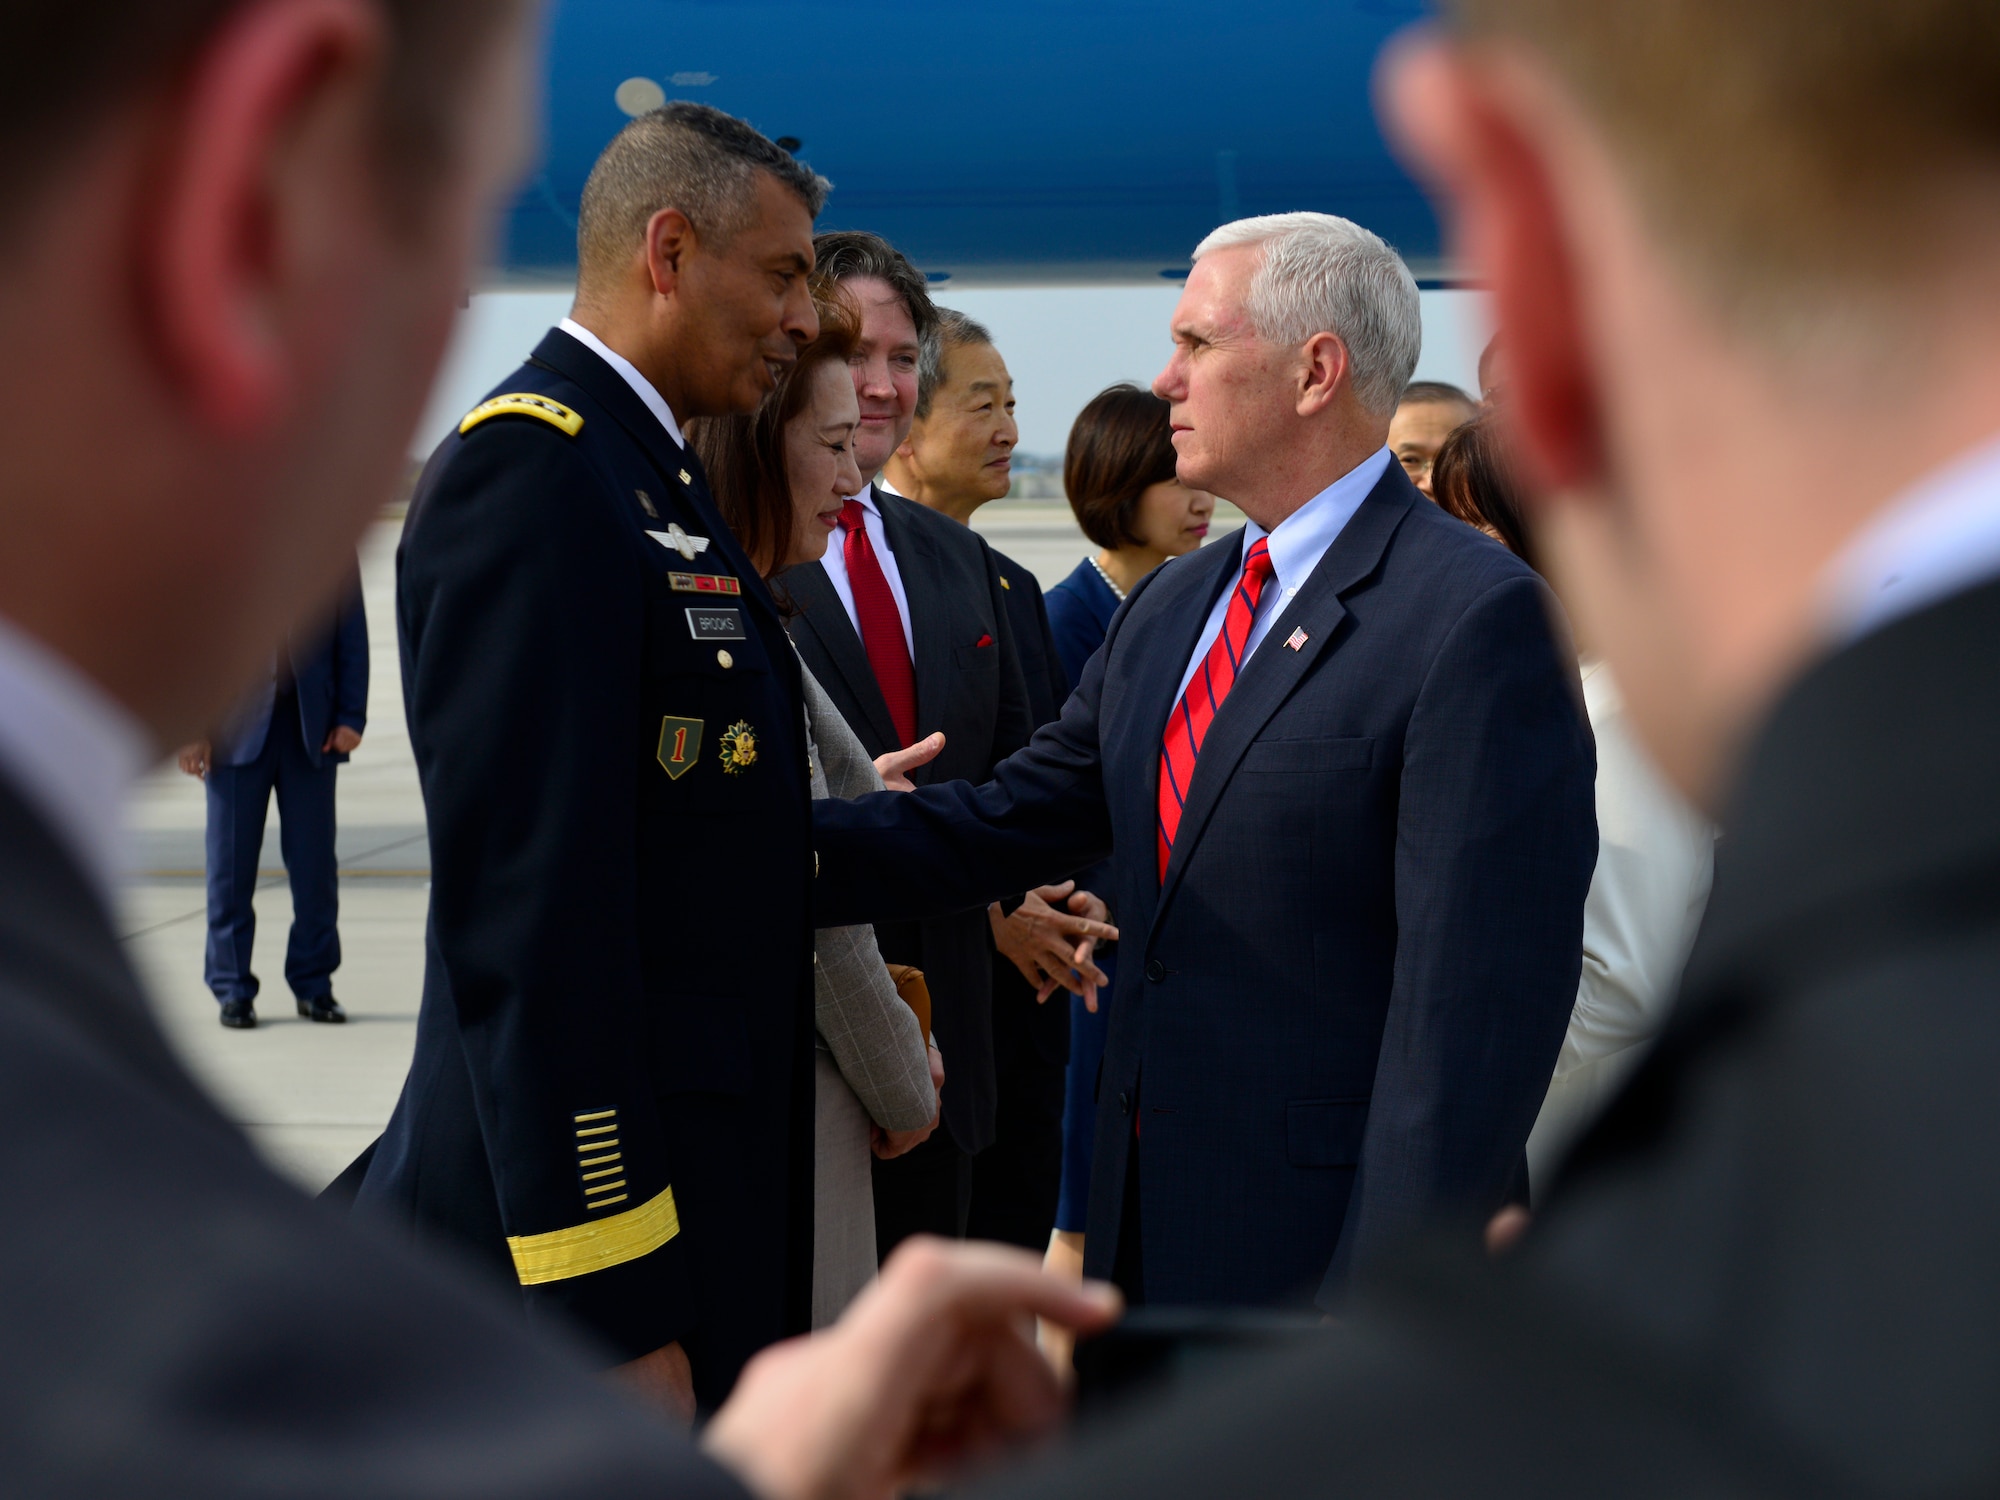 U.S. Vice President of the United States Mike R. Pence greets U.S. Army Gen. Vincent K. Brooks, United States Forces Korea commander, after landing at Osan Air Base, Republic of Korea, April 16, 2017. Pence’s visit to Korea highlighted the importance of the U.S. – ROK alliance, and how teamwork will be vital to deterring regional threats and maintaining stability on the Korean peninsula. (U.S. Air Force photo by Staff Sgt. Alex Fox Echols III)